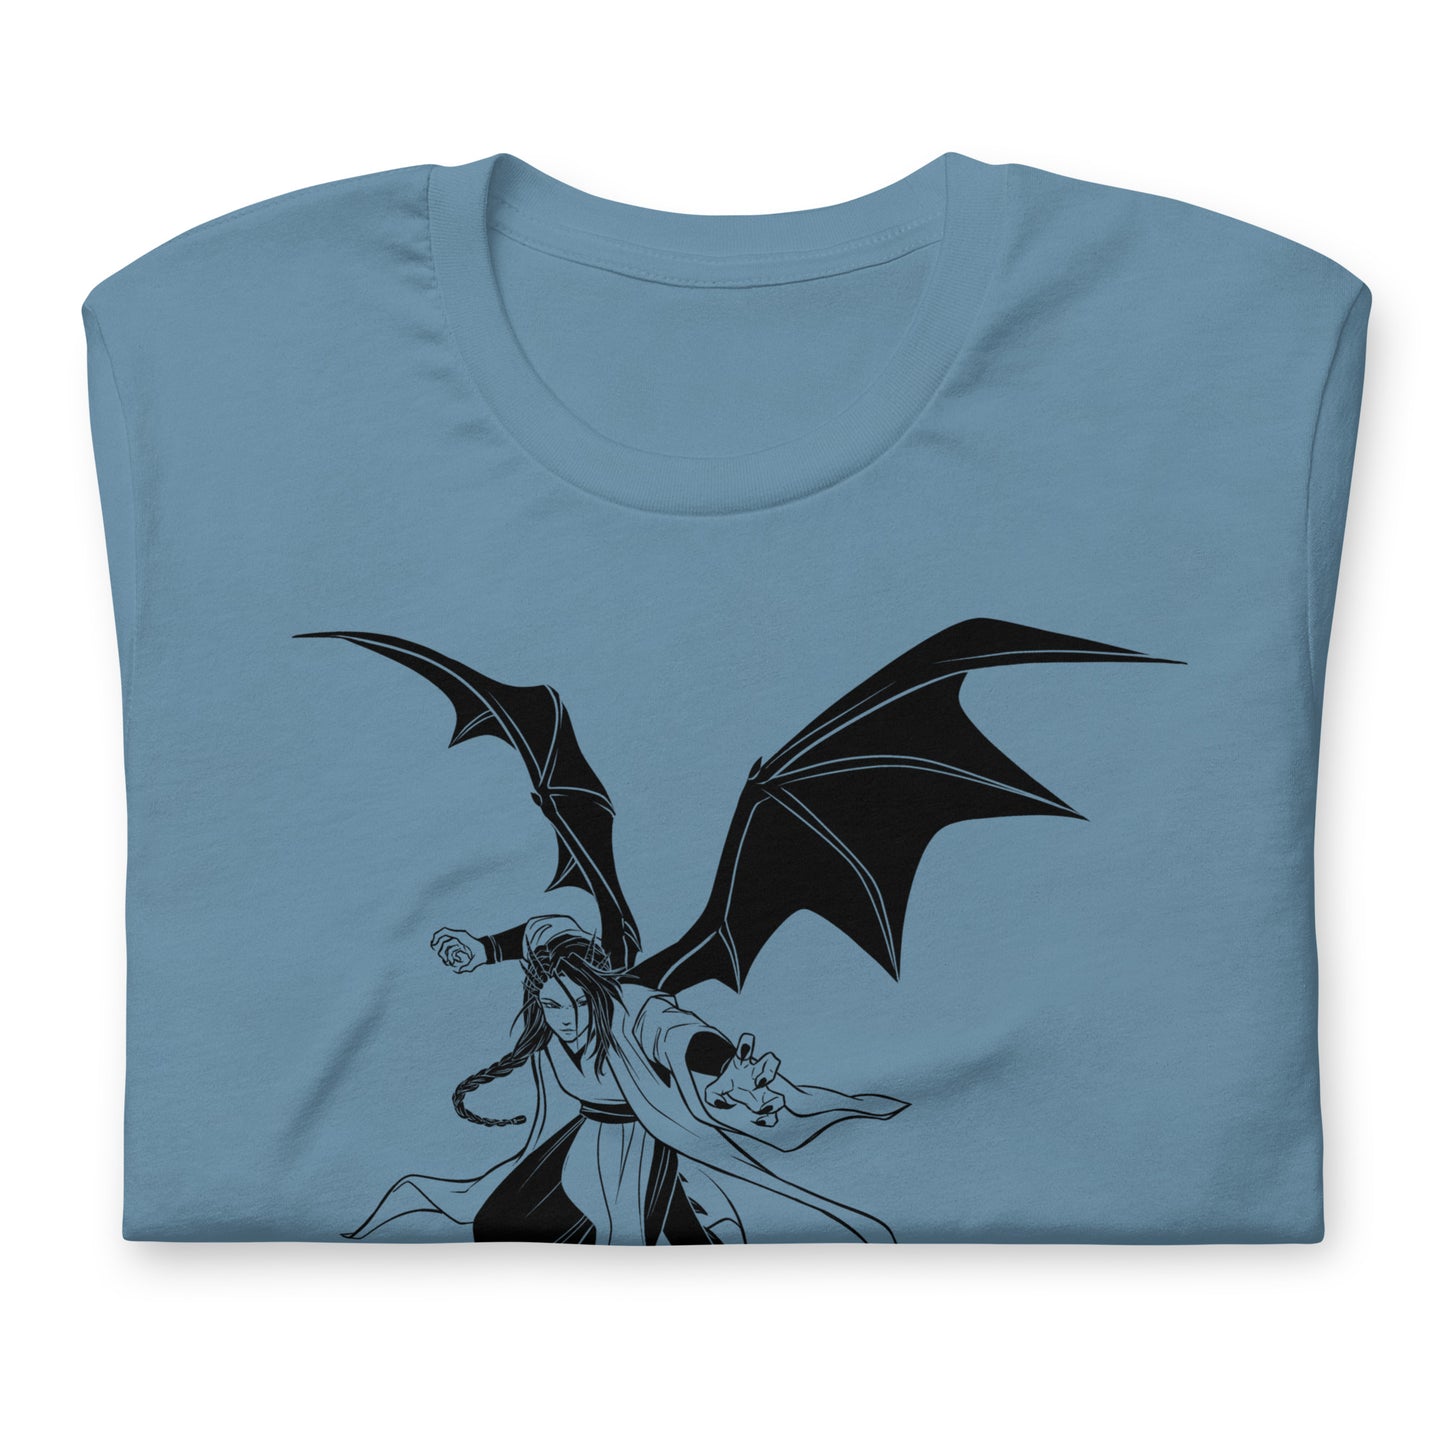 "Lord of Dragons" Unisex T-shirt (The Guild Codex)